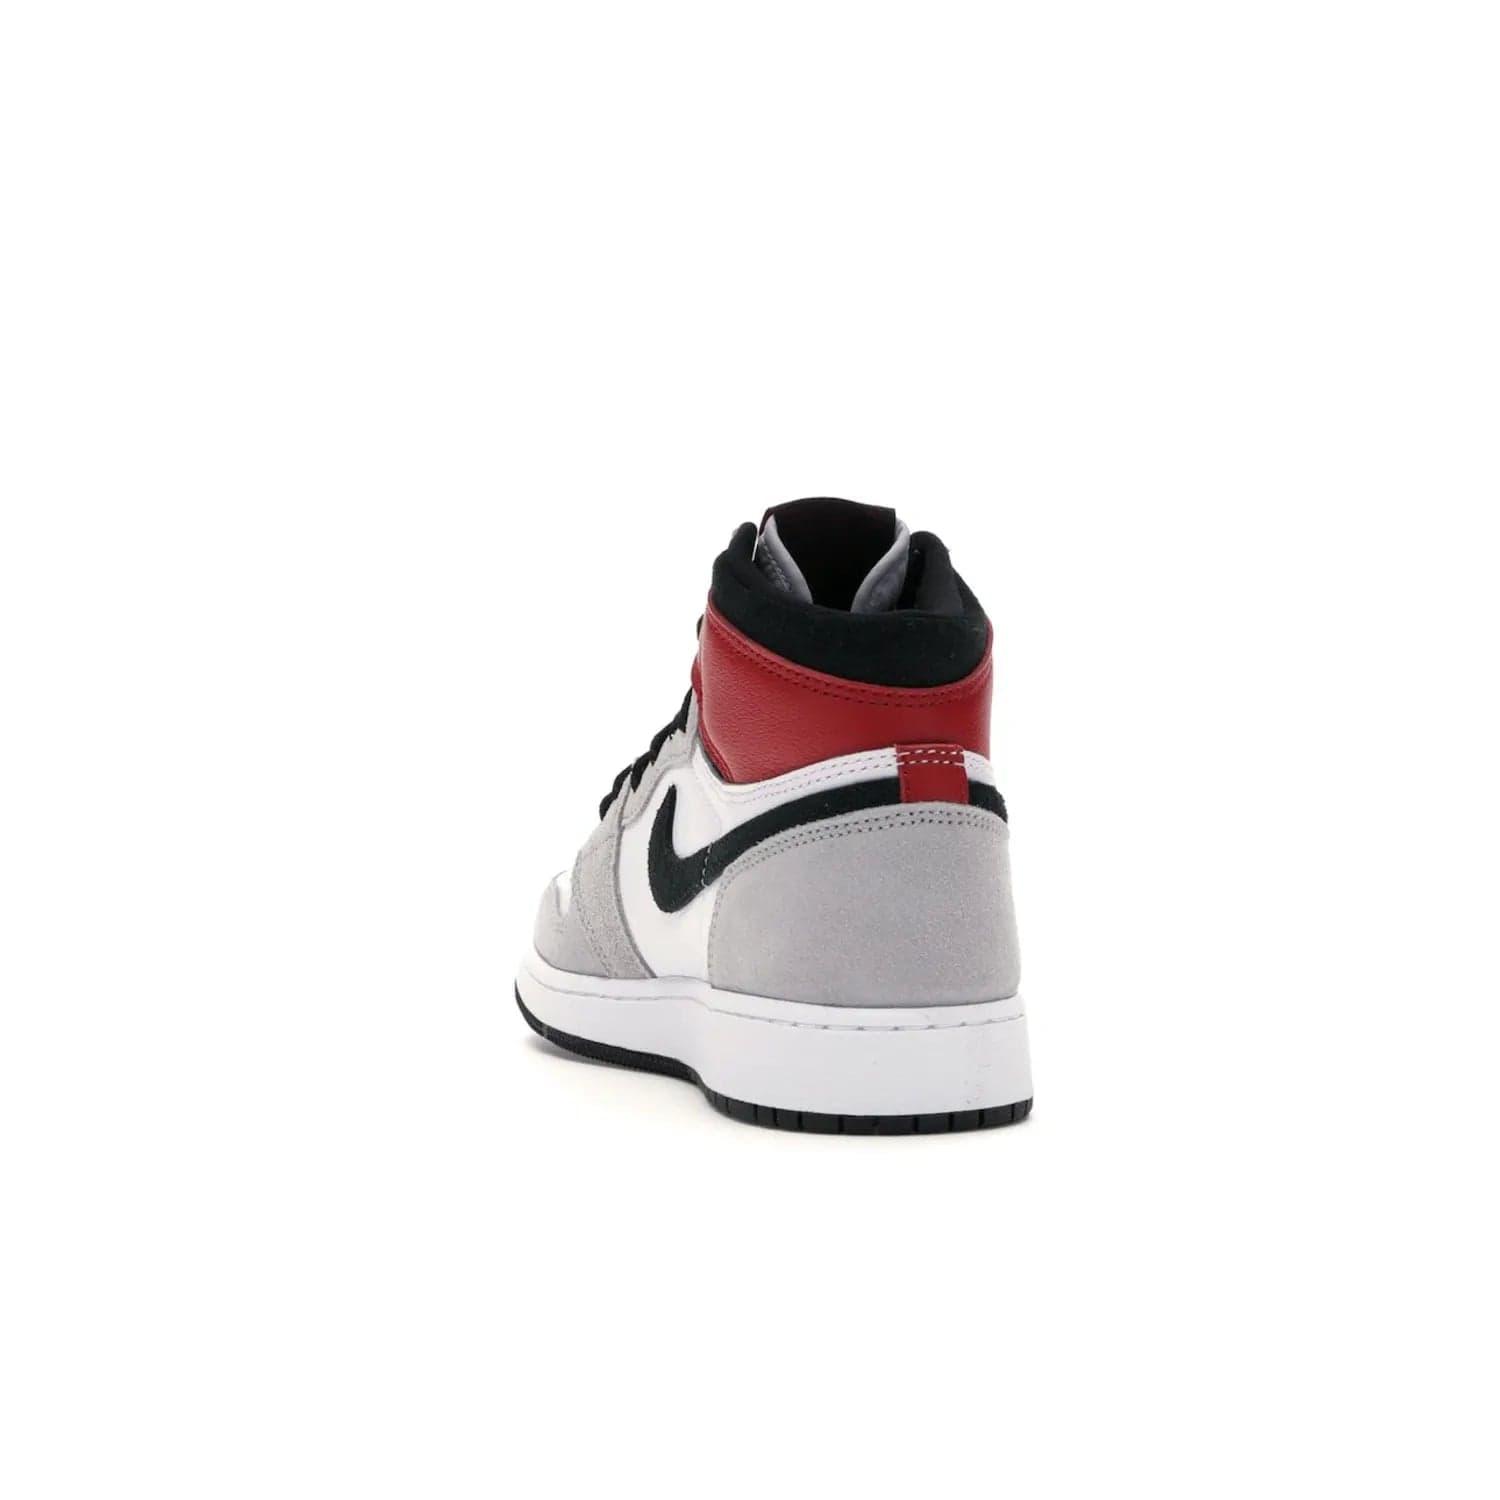 Jordan 1 Retro High Light Smoke Grey (GS) - Image 26 - Only at www.BallersClubKickz.com - Jordan 1 Retro High Light Smoke Grey (GS) features shades of grey, black, and Varsity Red with a bold silhouette. Premium white leather and suede overlays create a unique look. Released July 2020, offering style and performance. Perfect sneaker for any collector or fan.